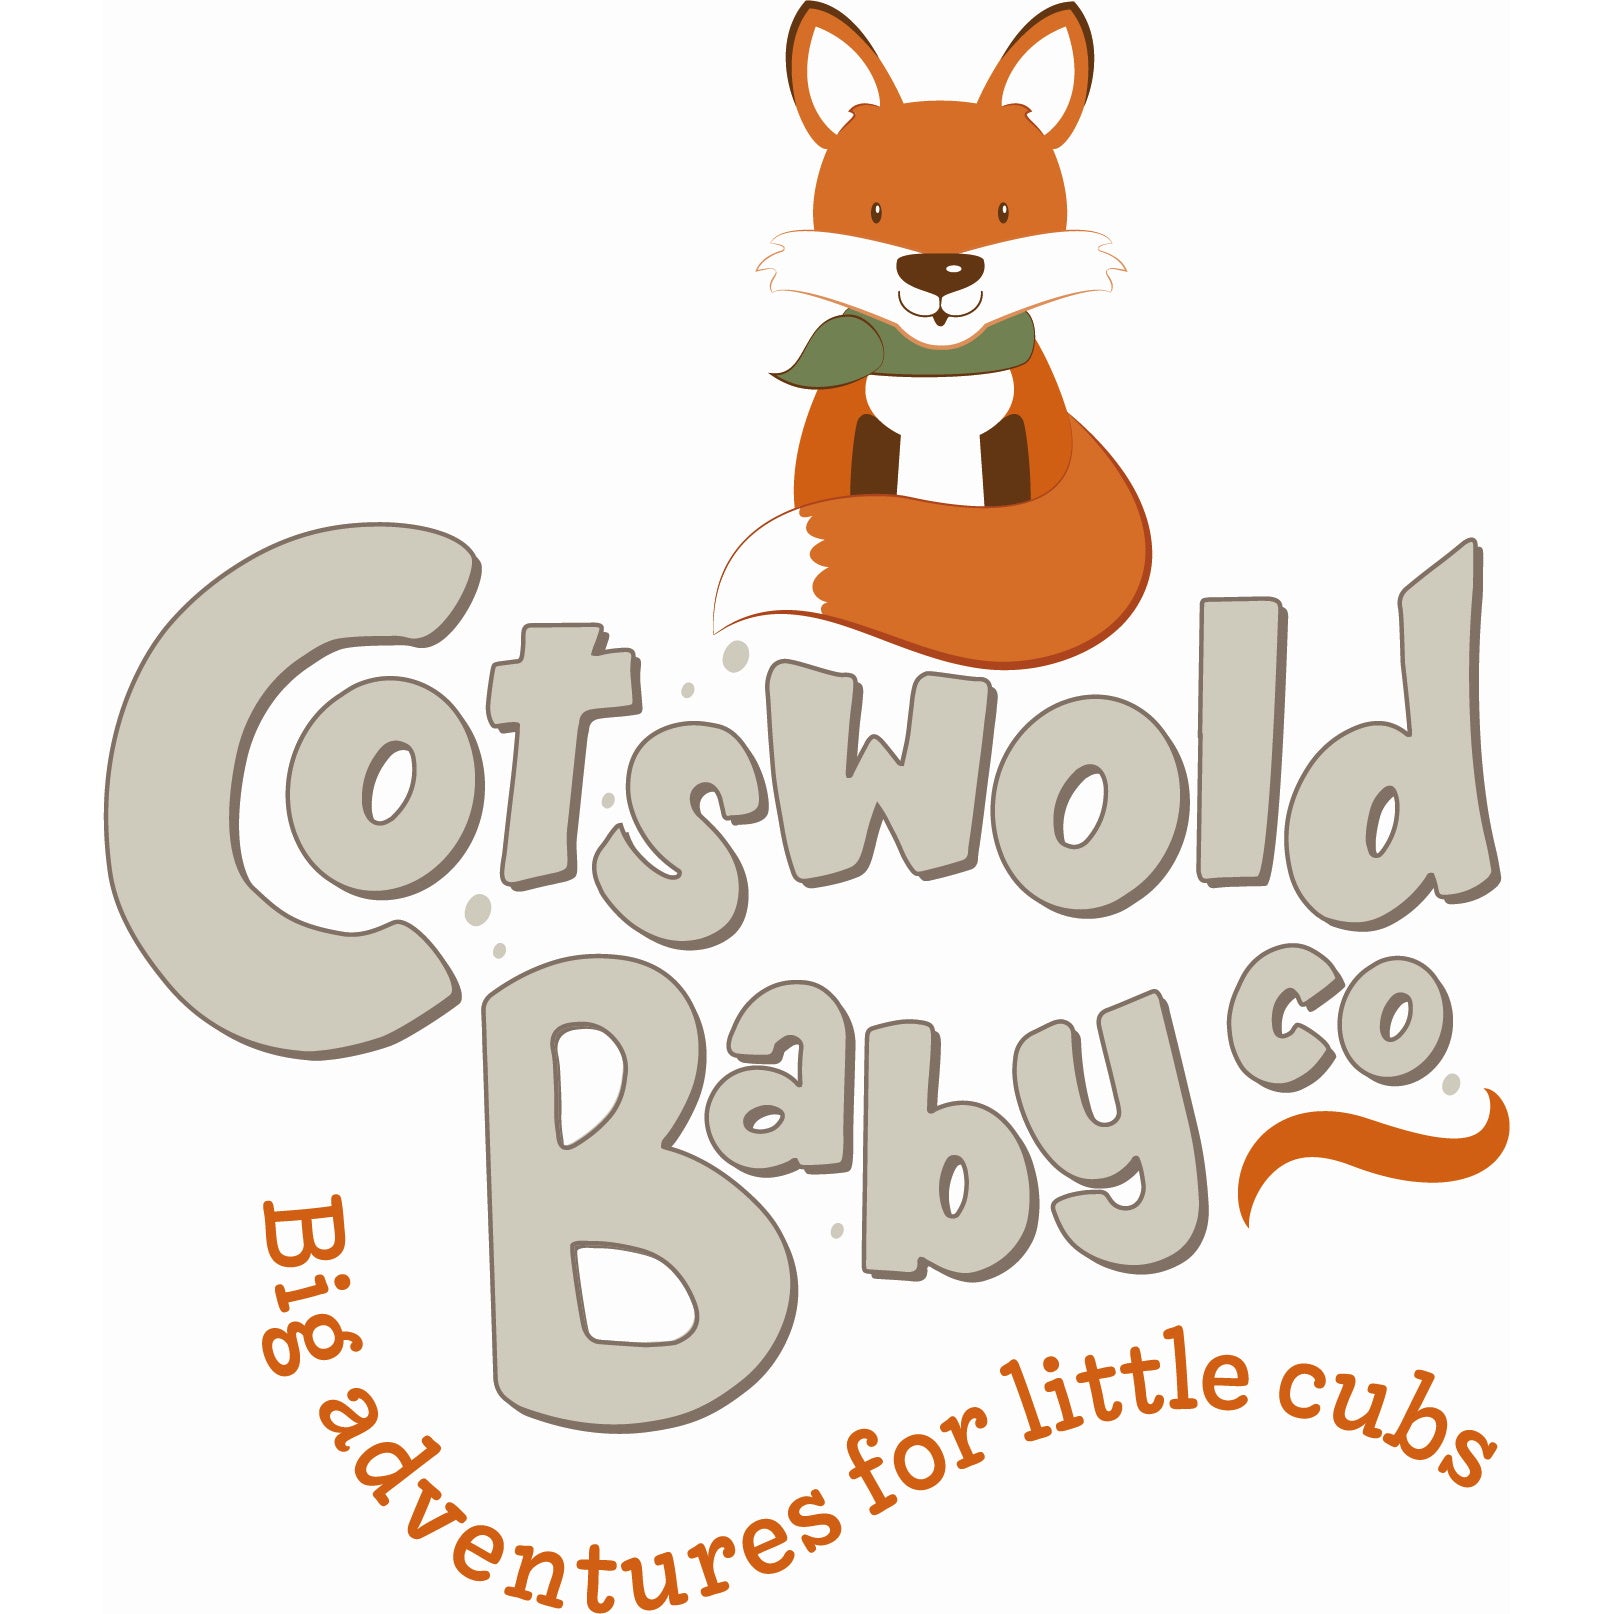 Cotswold Baby Co.